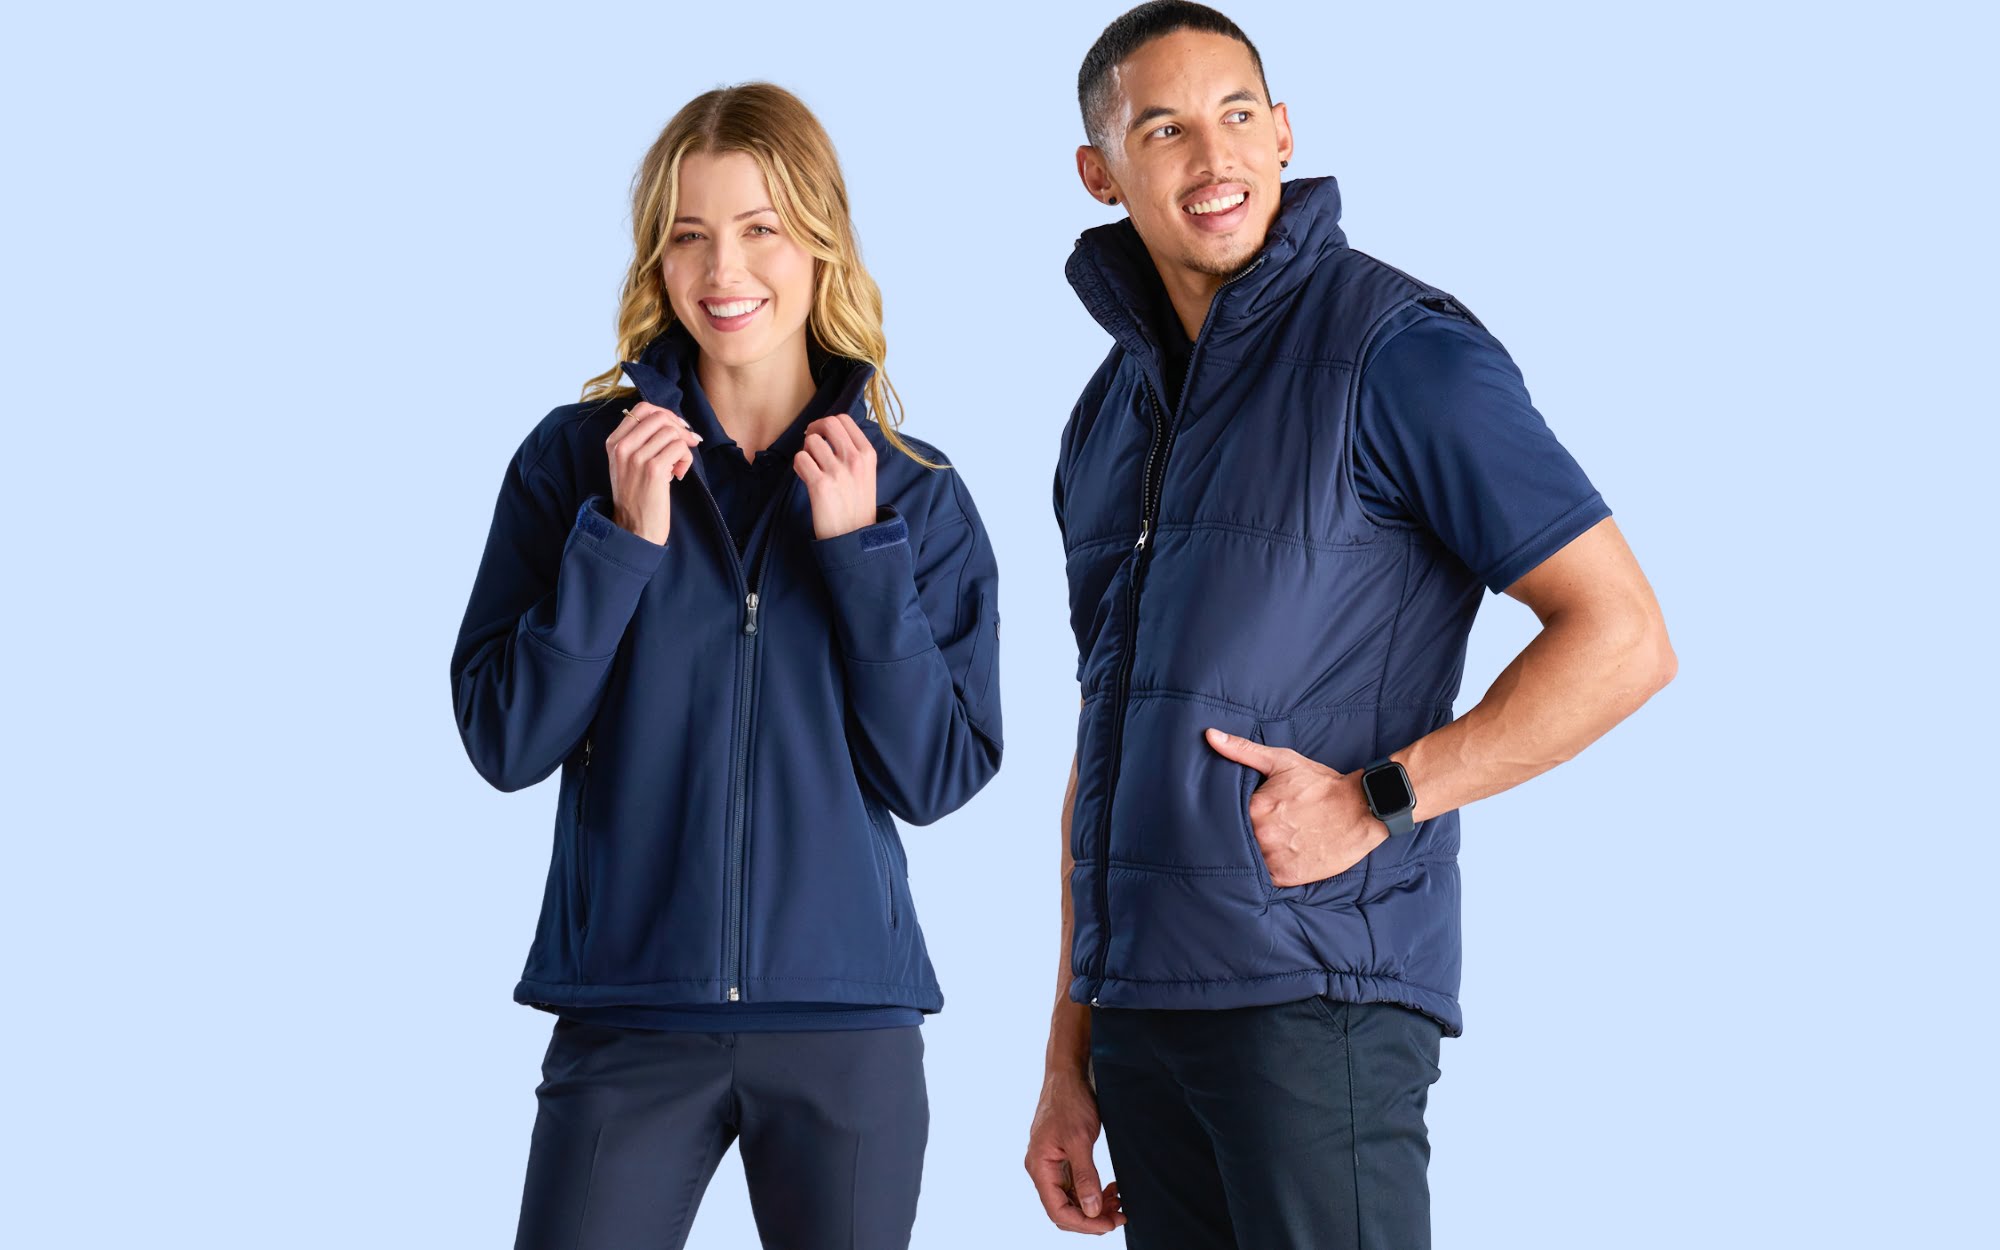 The banner for the article 'Uniforms Without an A-Gender' displays a blue background. In the foreground, a male and female model stand side by side, both wearing unisex jackets. The jackets are designed to be gender-neutral, emphasising inclusivity and breaking traditional gender norms in uniform attire. The blue background adds a visually appealing and modern touch to the banner, drawing attention to the article's exploration of gender-neutral uniforms.